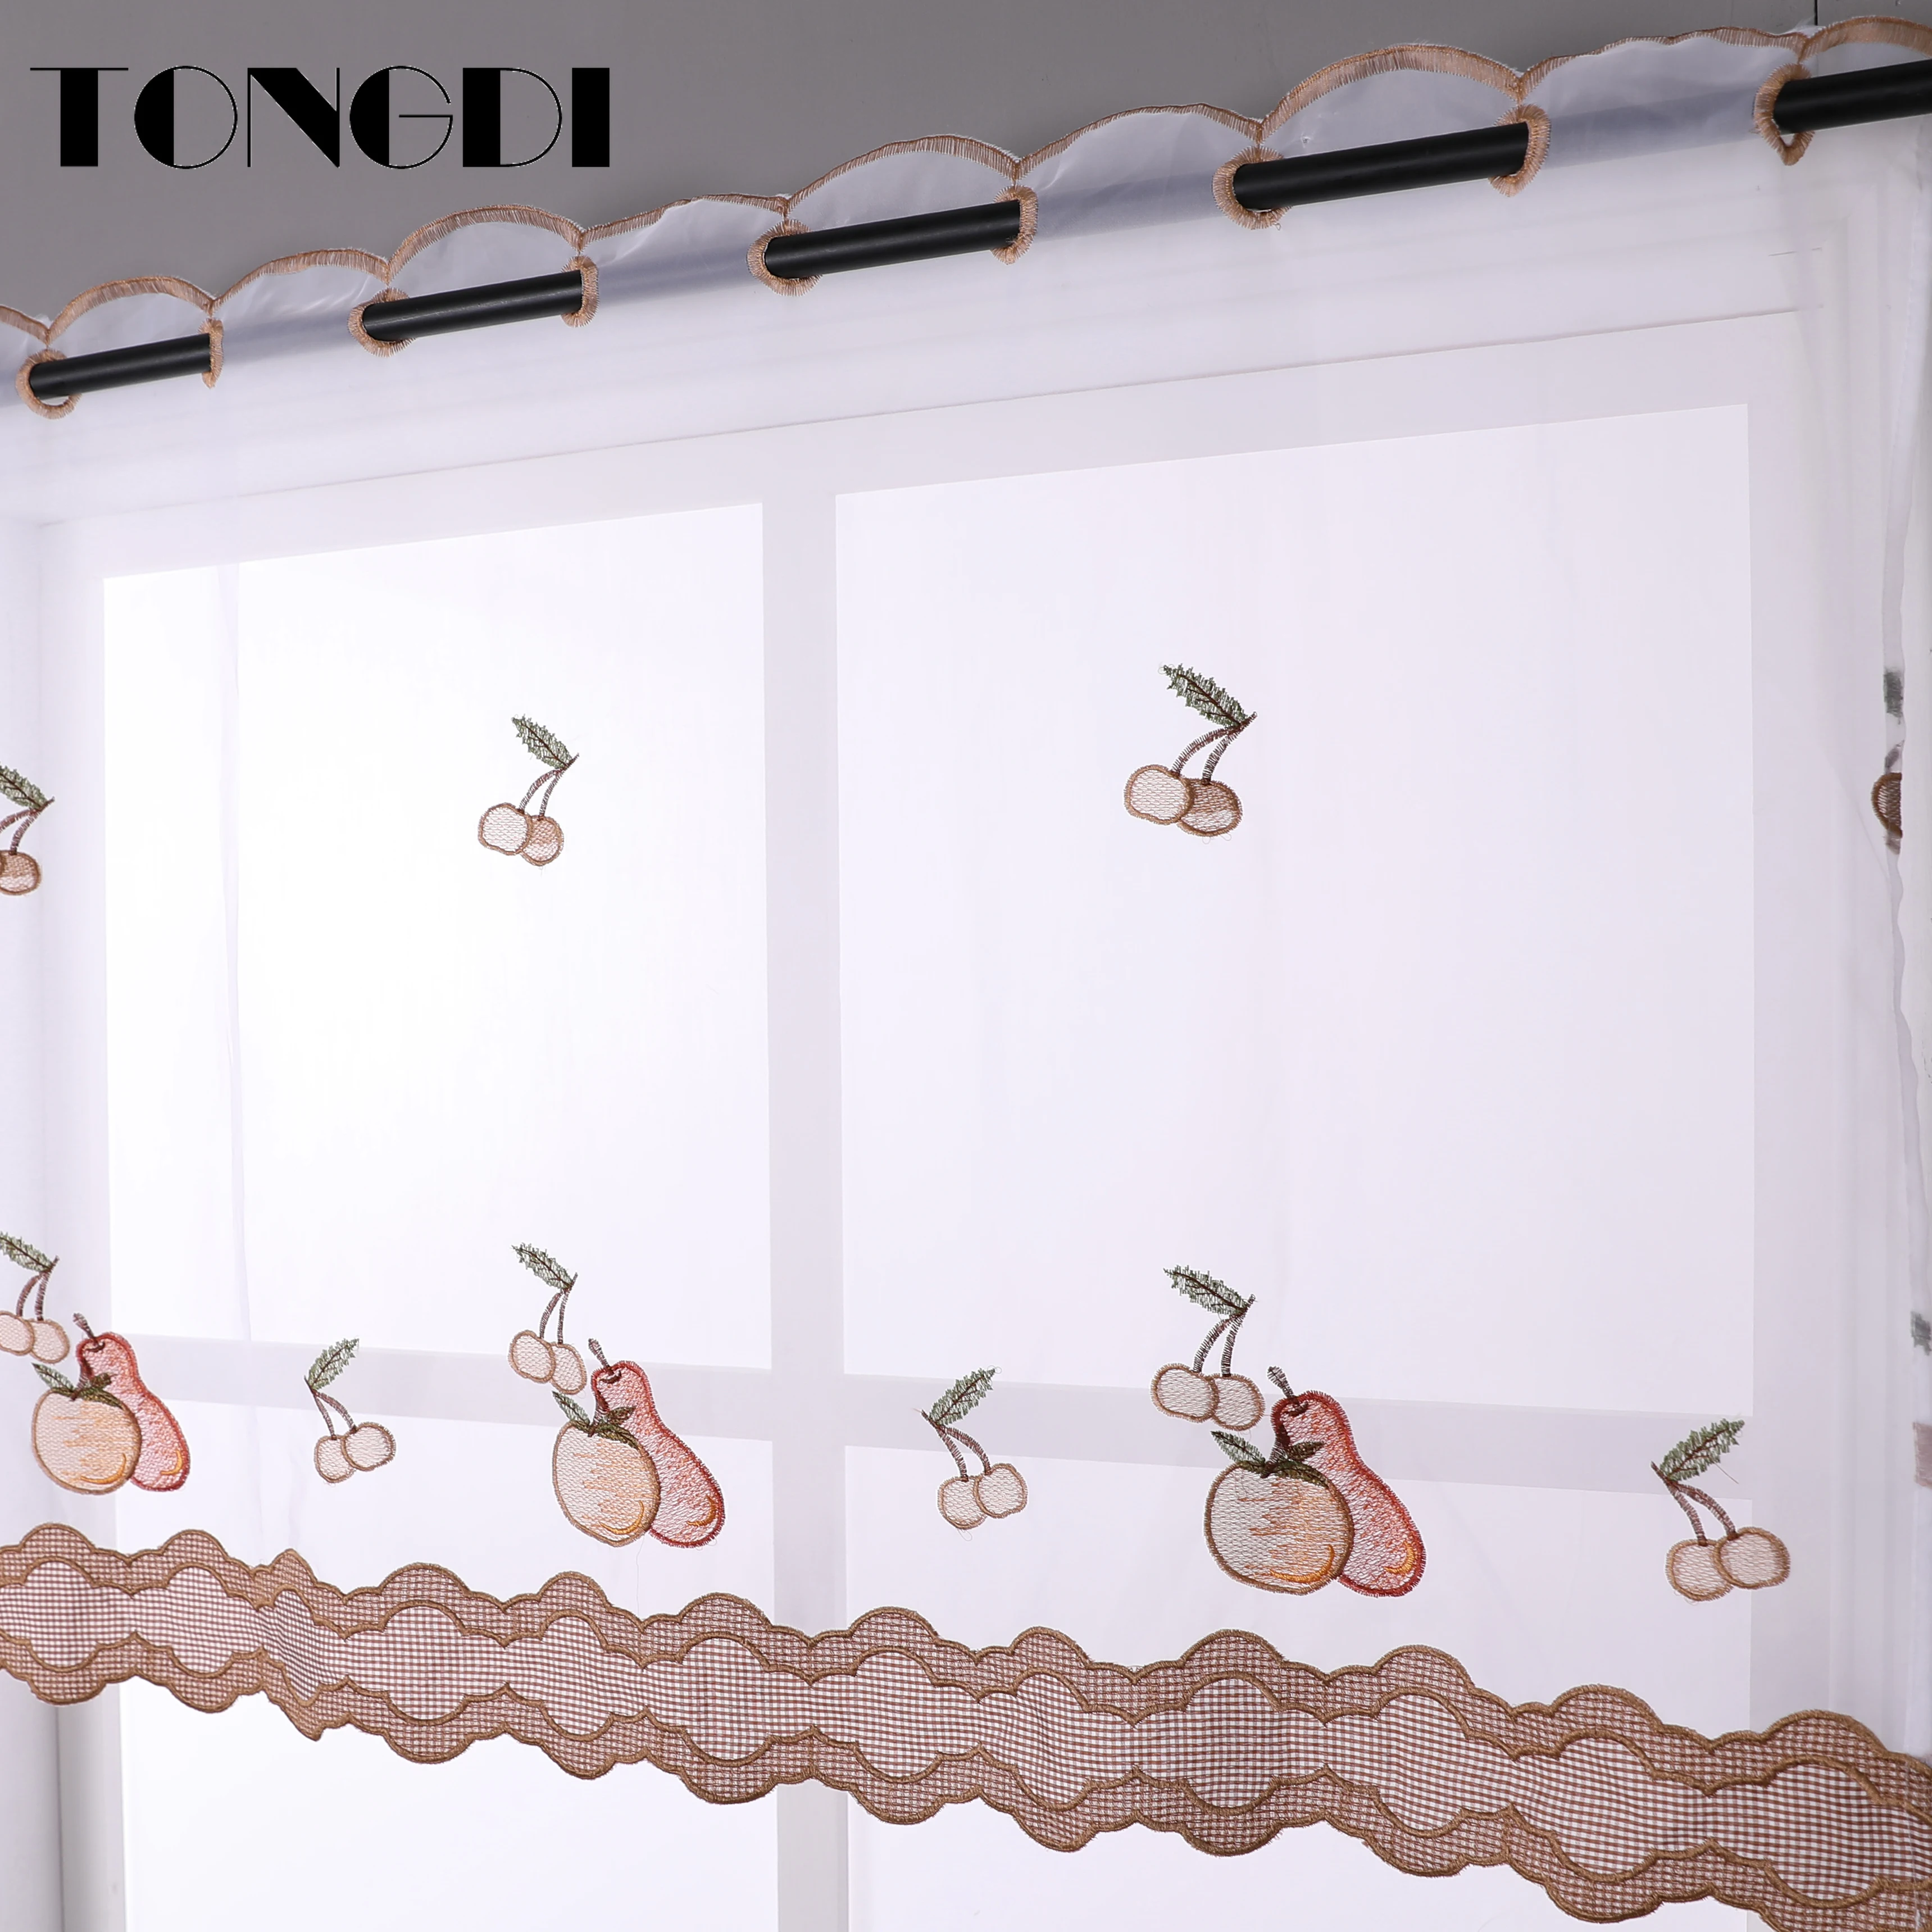 

TONGDI Kitchen Curtain Valance Sheer Tiers Pastorall Fruit Cafe Tulle Beautiful Embroidery For Window Of Kitchen Dining Room